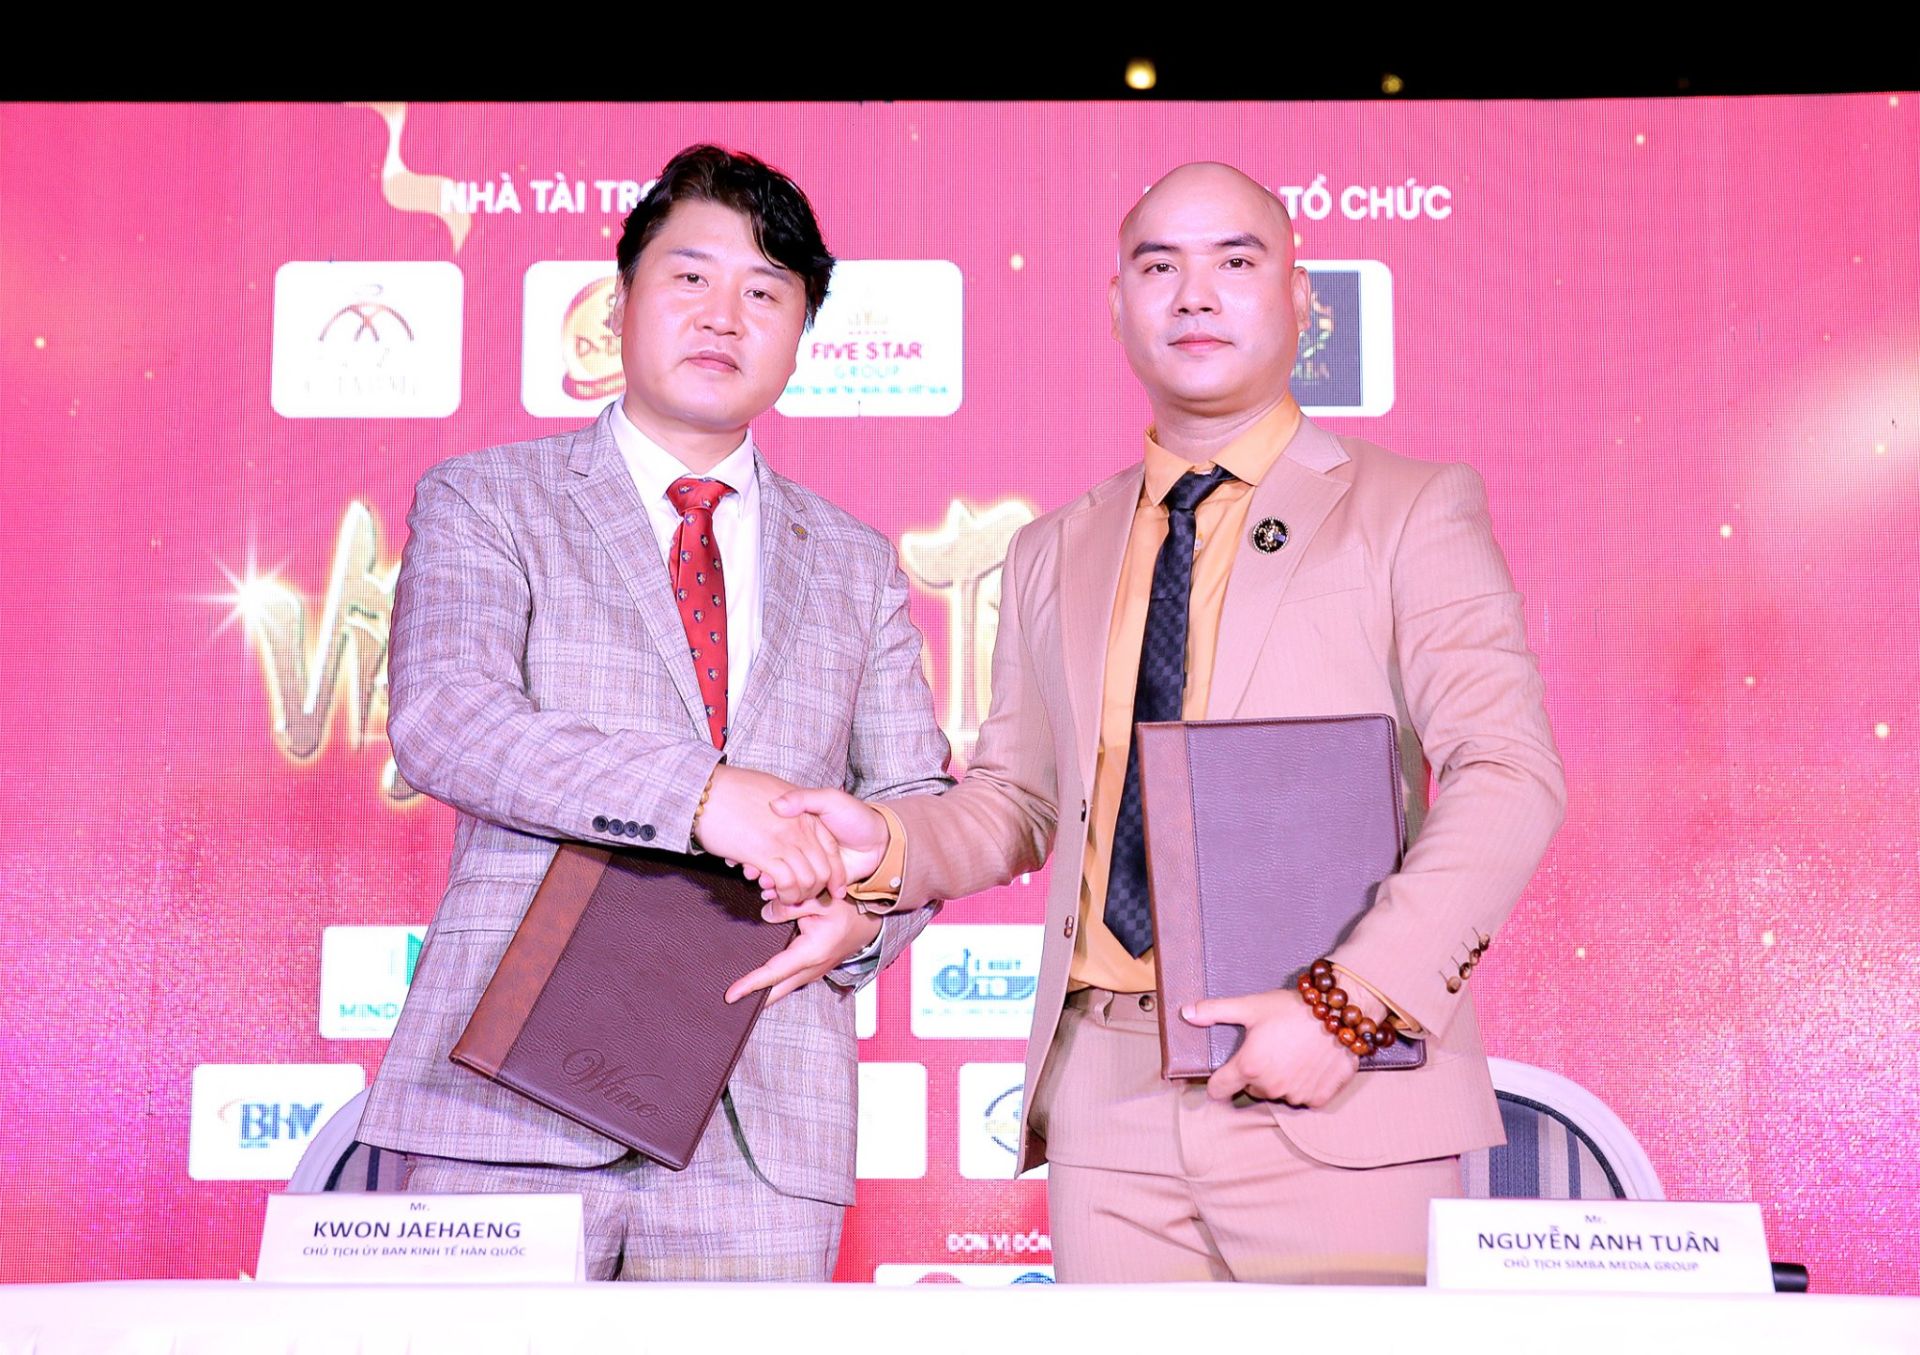 the Vietnam and International Trade and Investment Promotion Center in collaboration with the Korea-Vietnam Economic Support Committee and Simba Media Group organized a program to connect trade and art performances with the theme "Vietnam elite - International integration"..